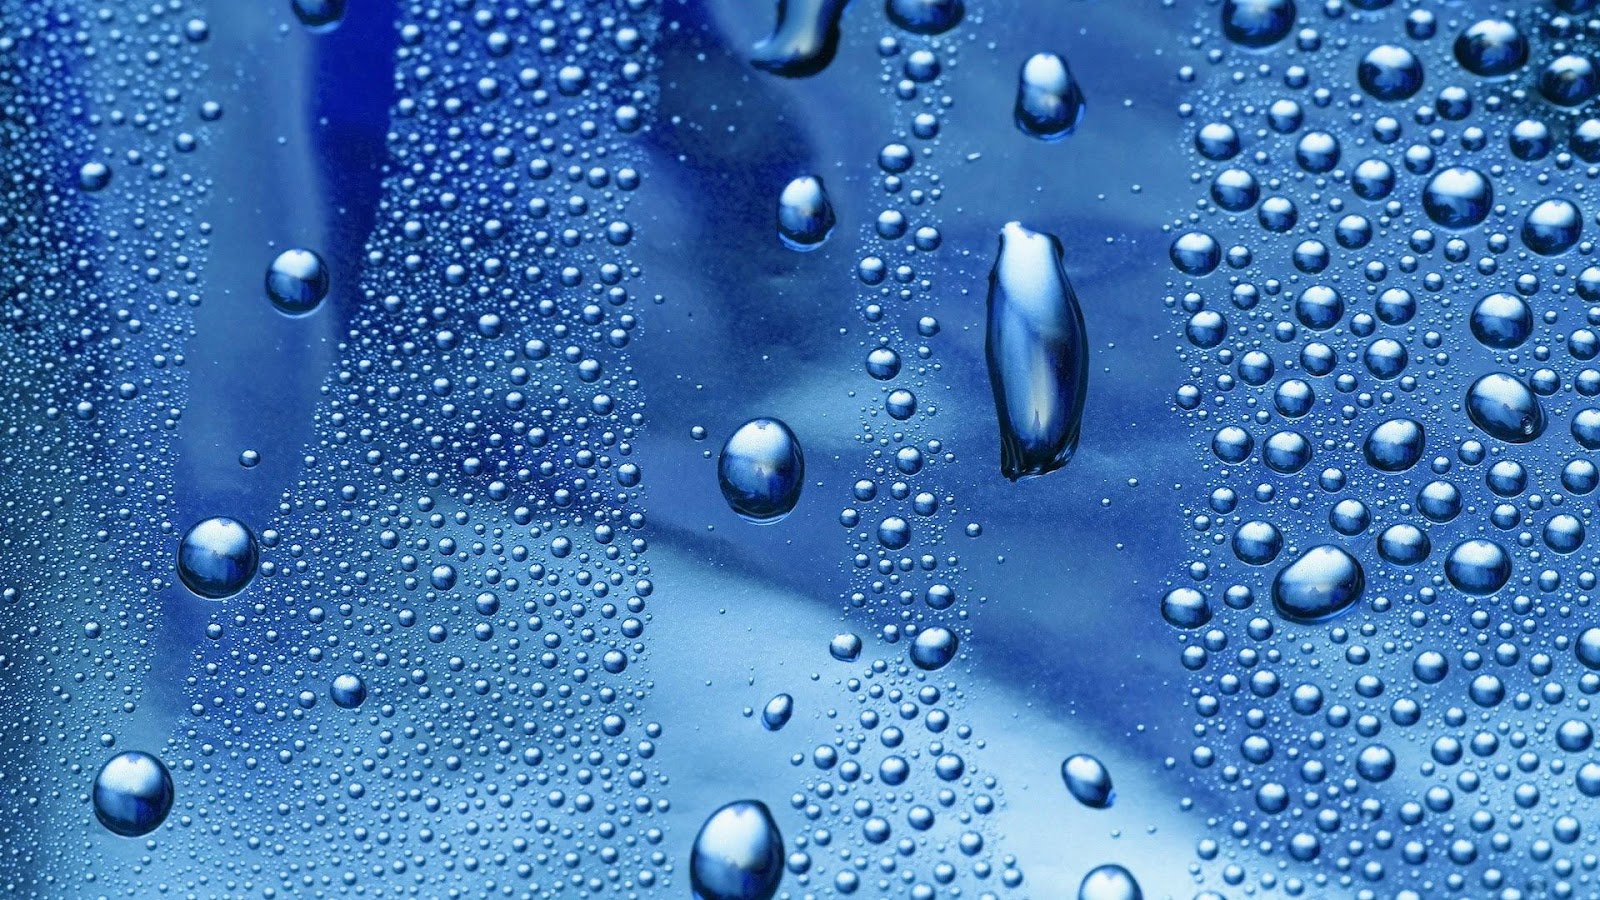 raindrops on blue window wallpaper   View All